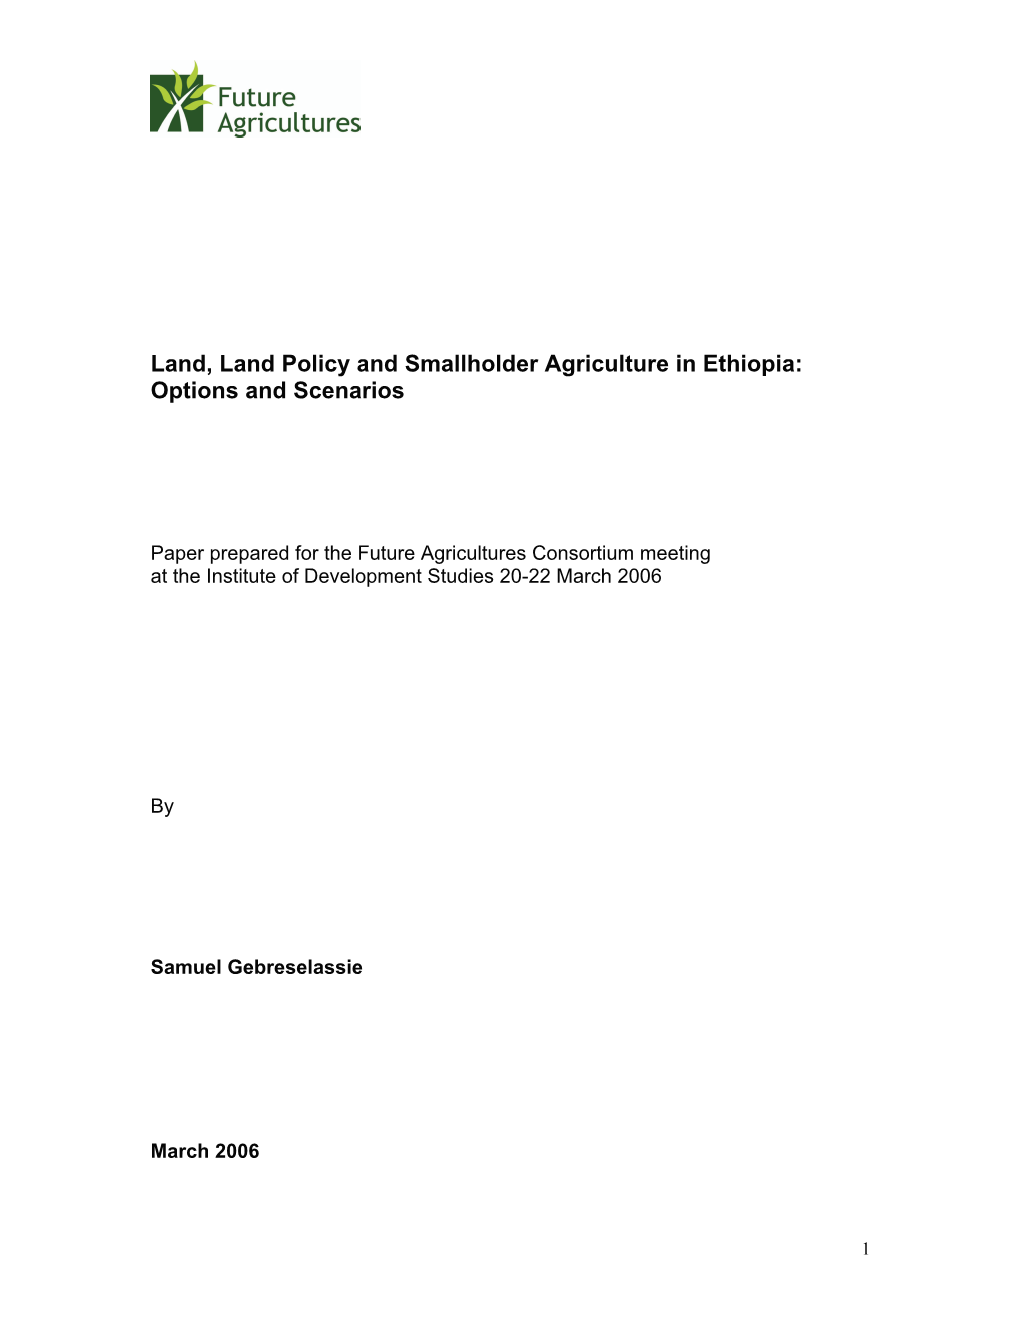 Land, Land Policy and Agriculture in Ethiopia